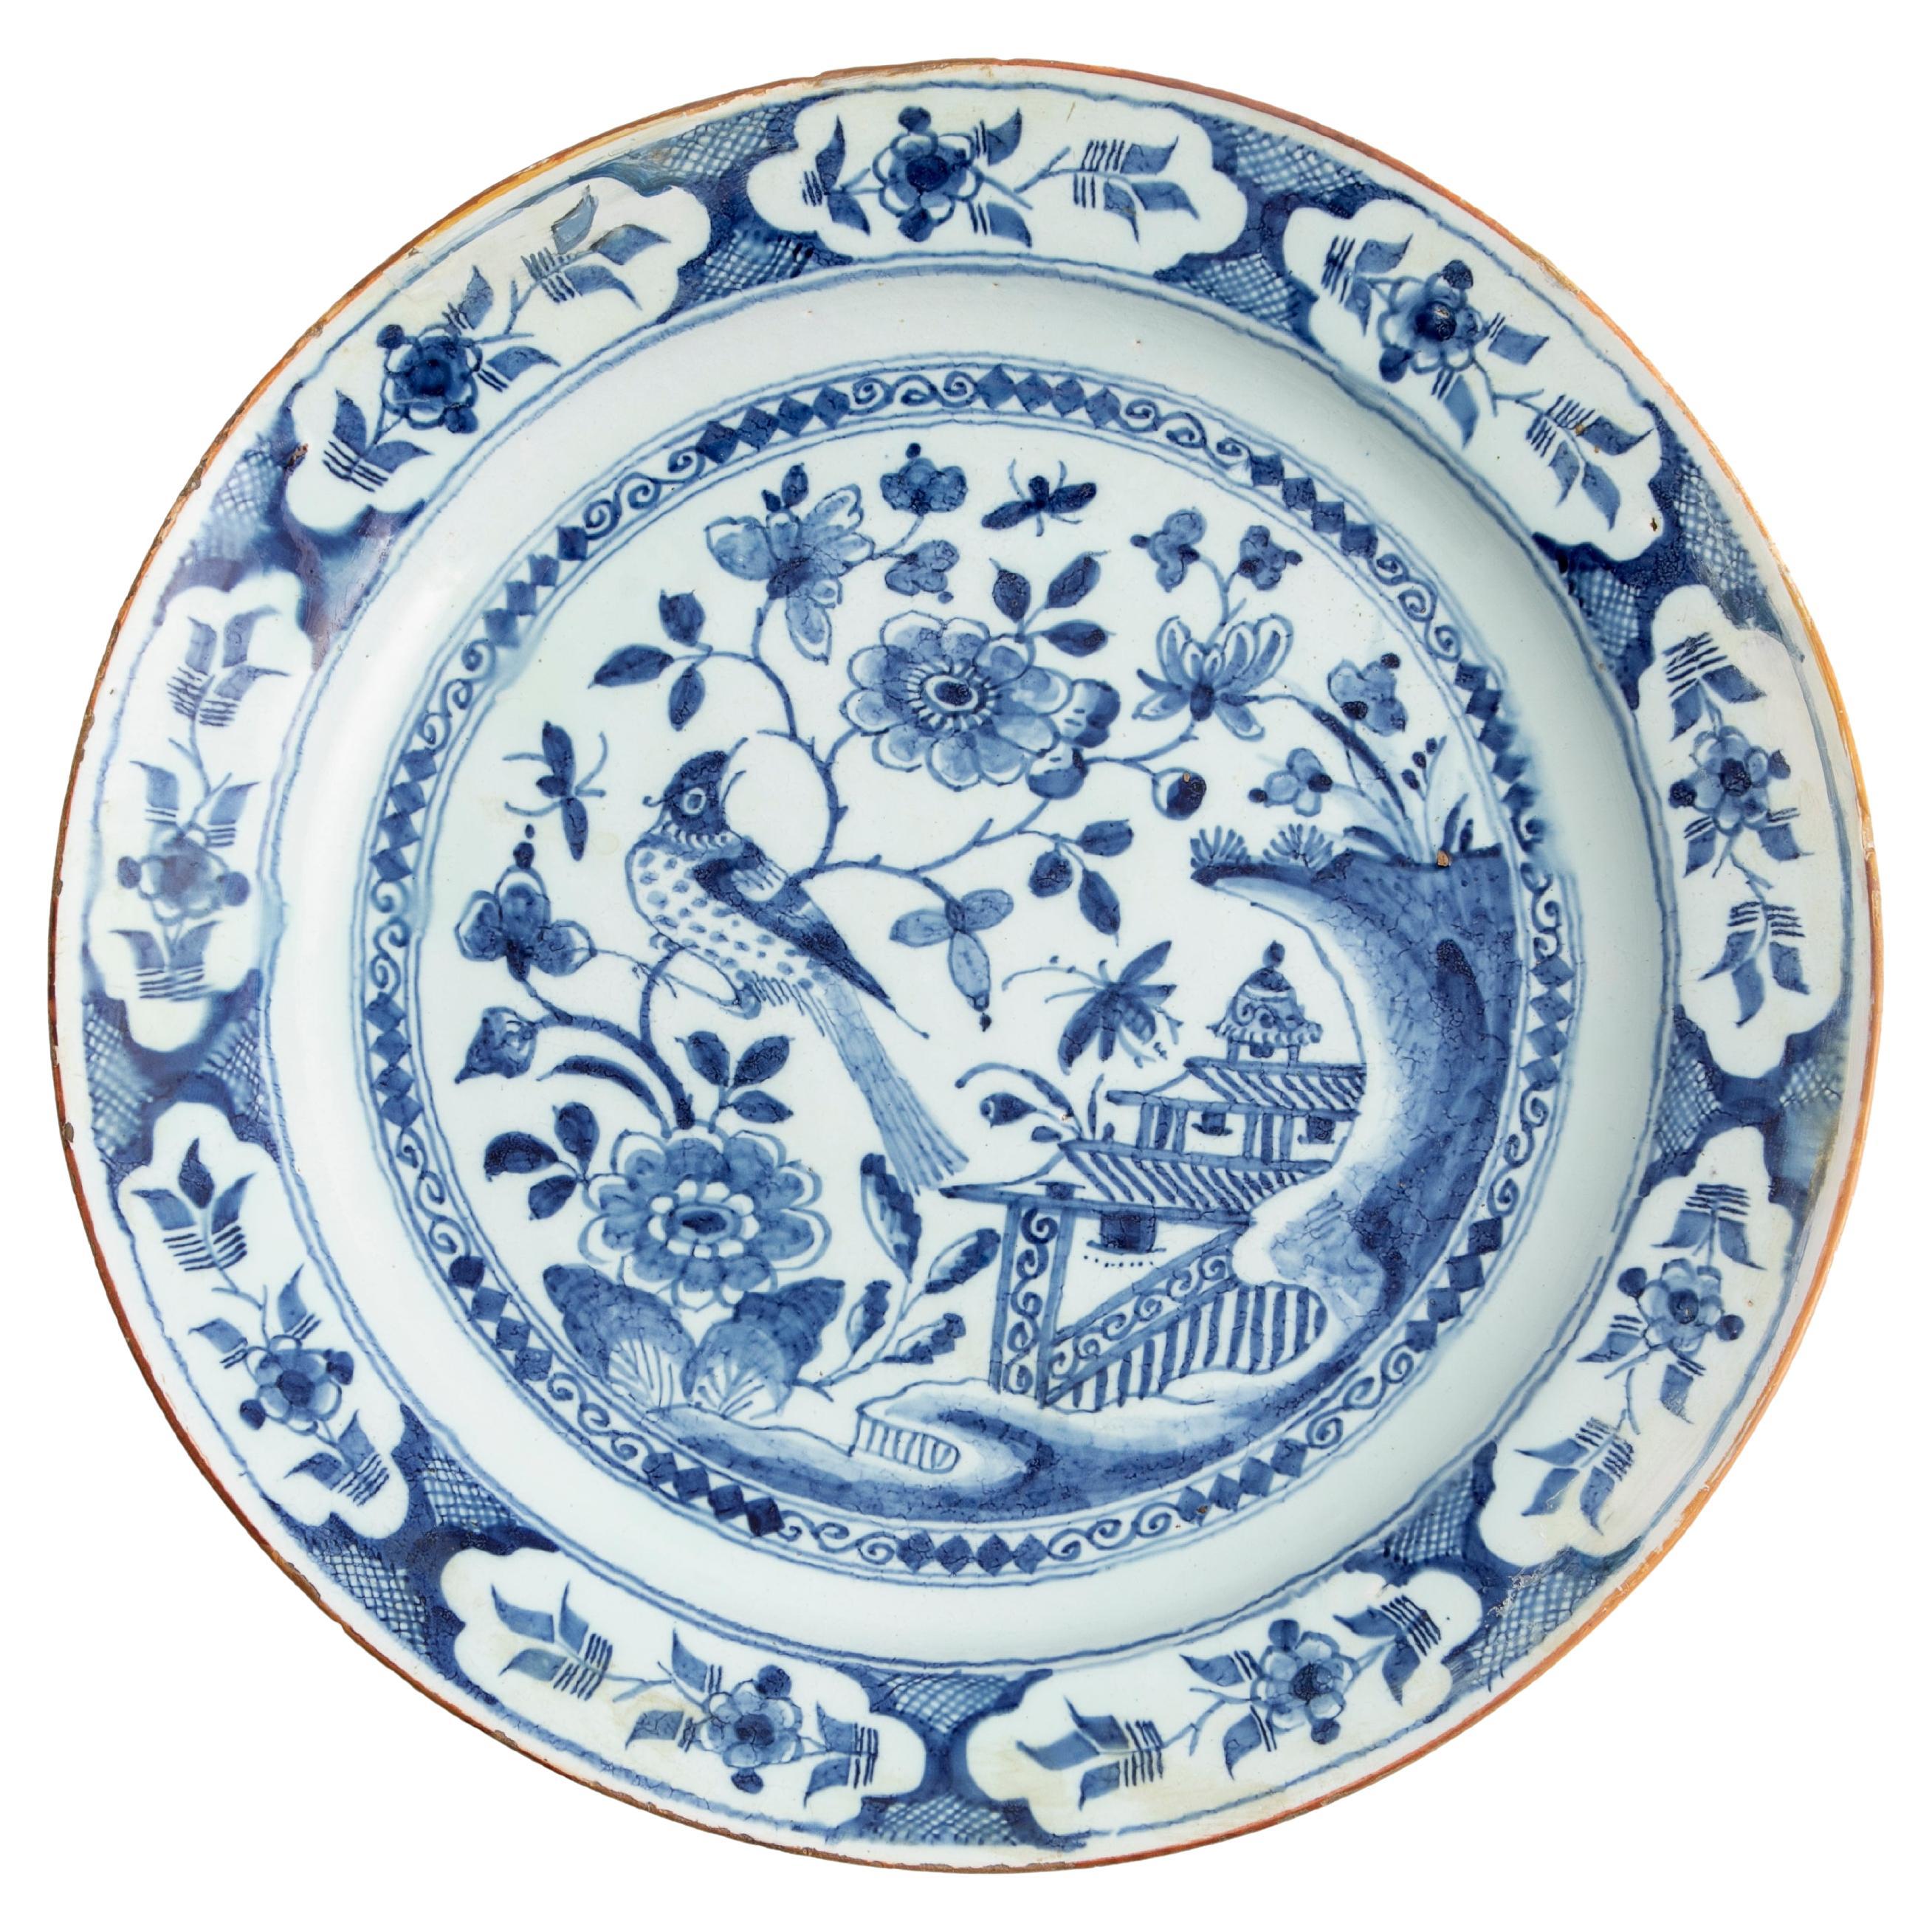 Antique 18th Century Dutch Delft Plate with Chinoiserie Decoration